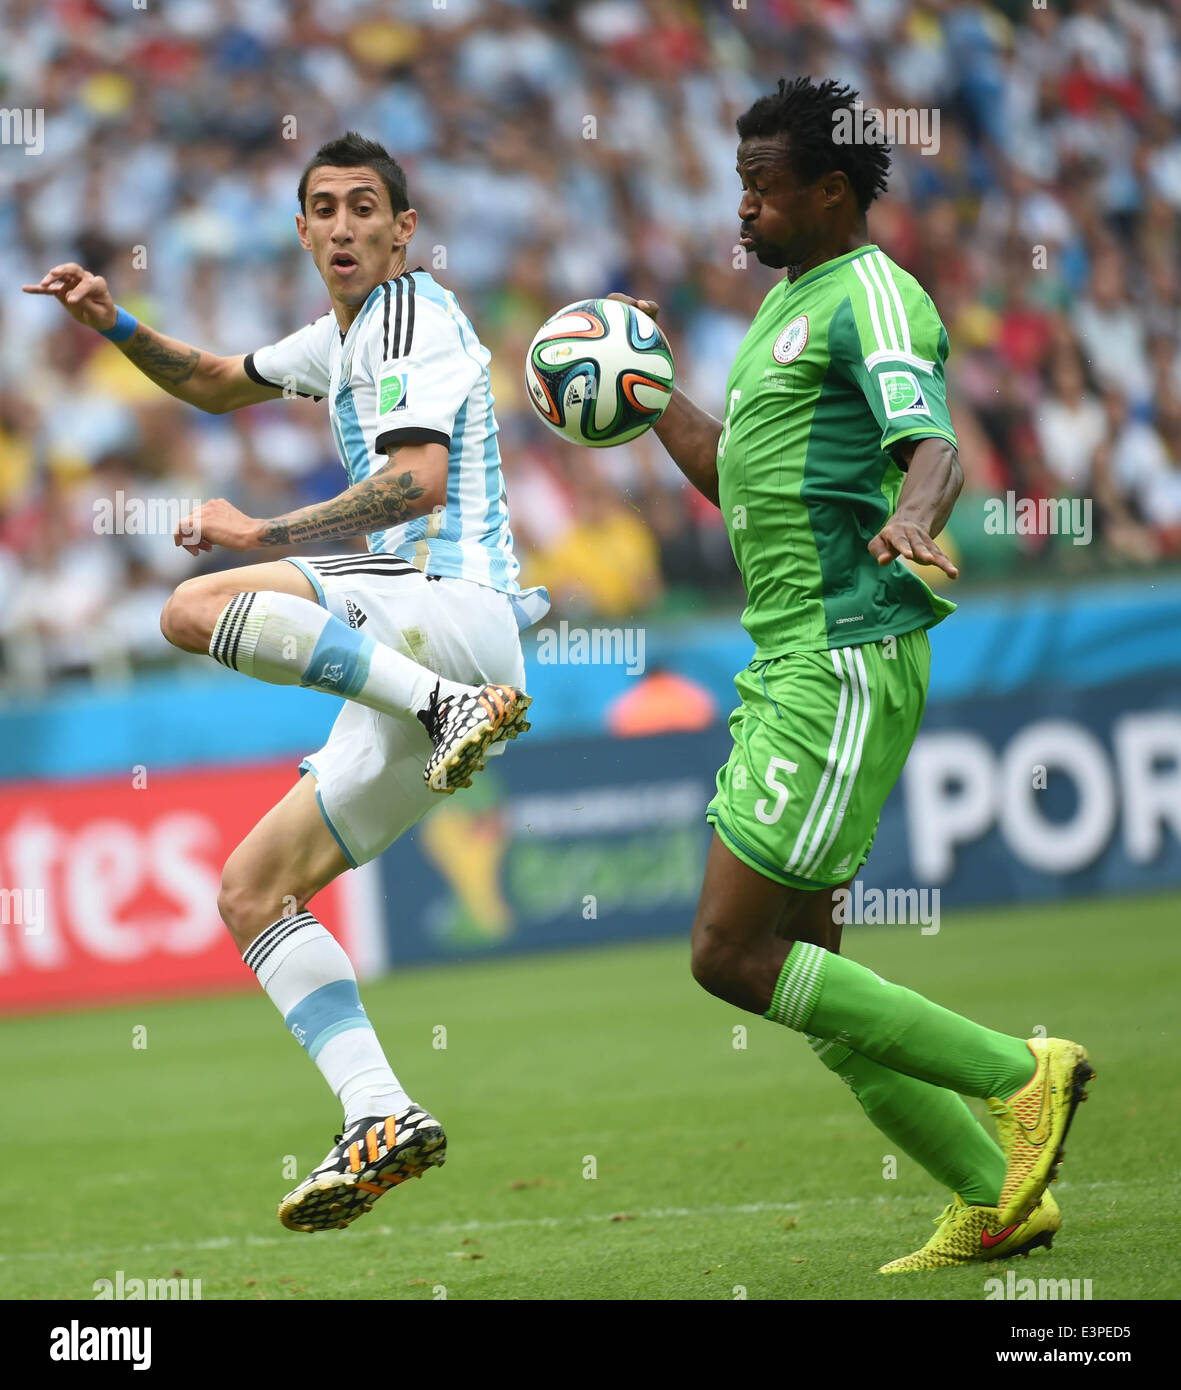 Porto Alegre, Brazil. 25th June, 2014. Argentina's Angel Di Maria (L) vies with Nigeria's Efe Ambrose during a Group F match between Nigeria and Argentina of 2014 FIFA World Cup at the Estadio Beira-Rio Stadium in Porto Alegre, Brazil, on June 25, 2014. © Li Ga/Xinhua/Alamy Live News Stock Photo